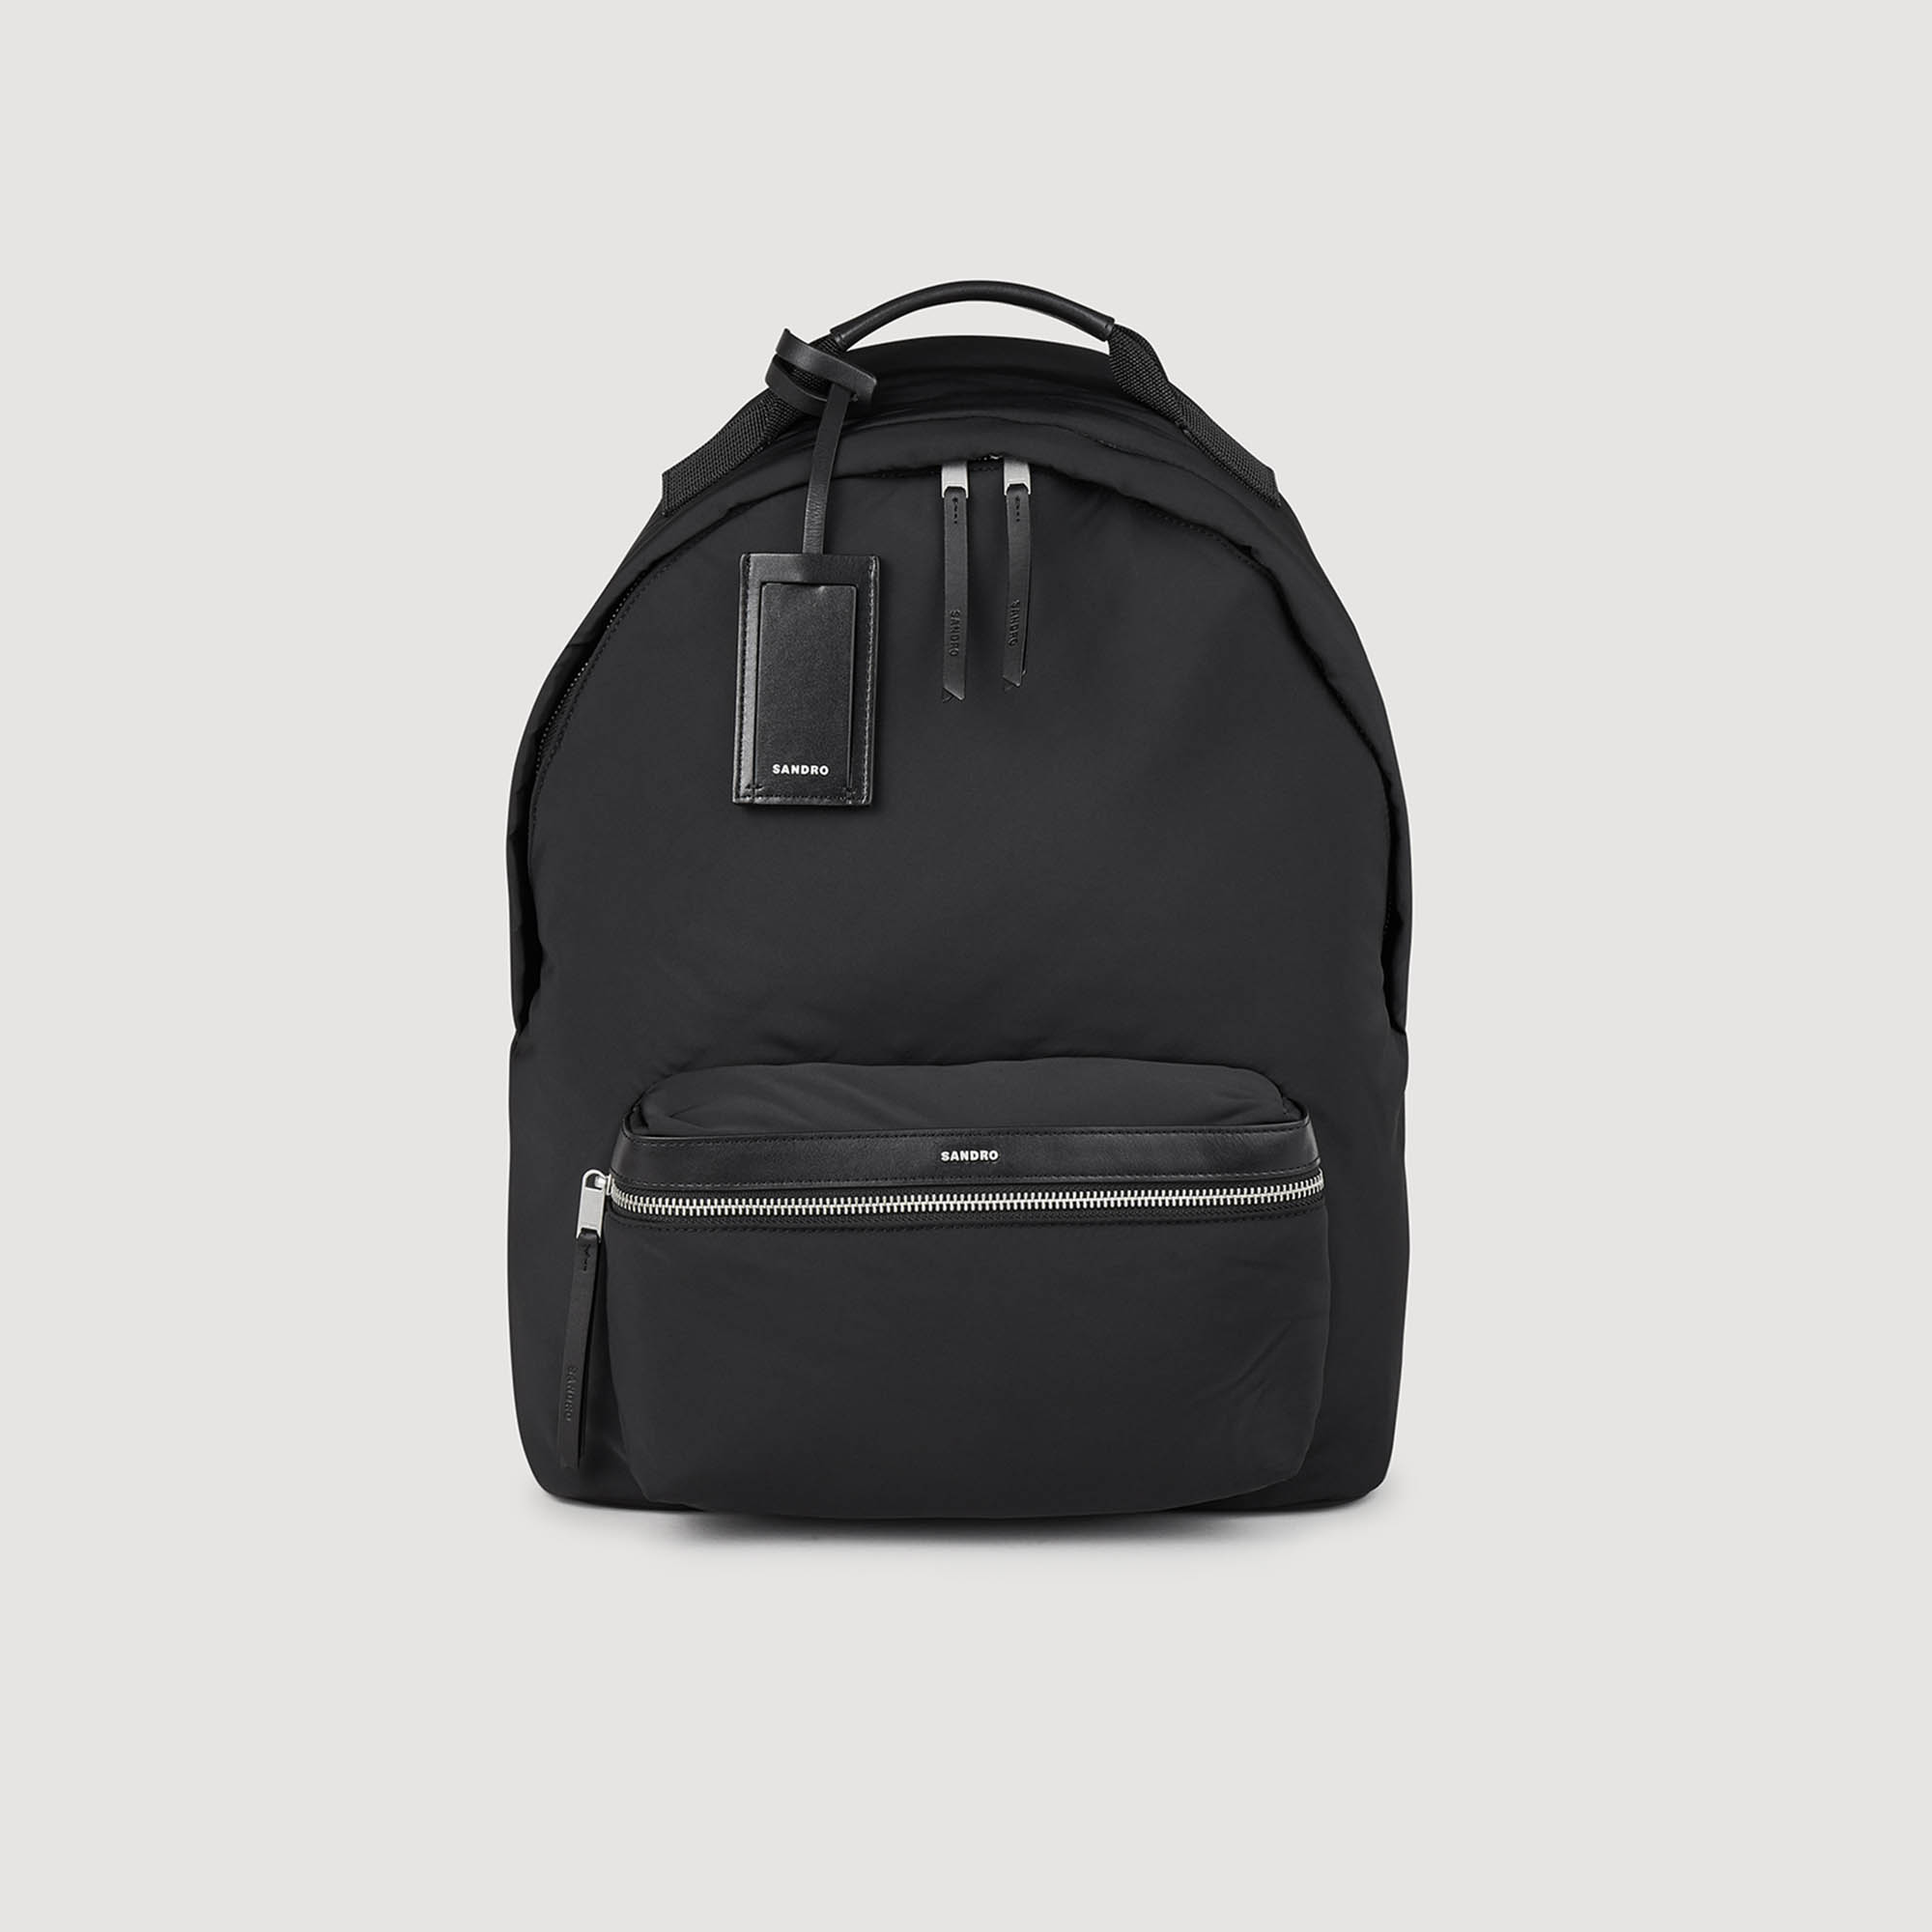 Sandro polyester Canvas and leather backpack